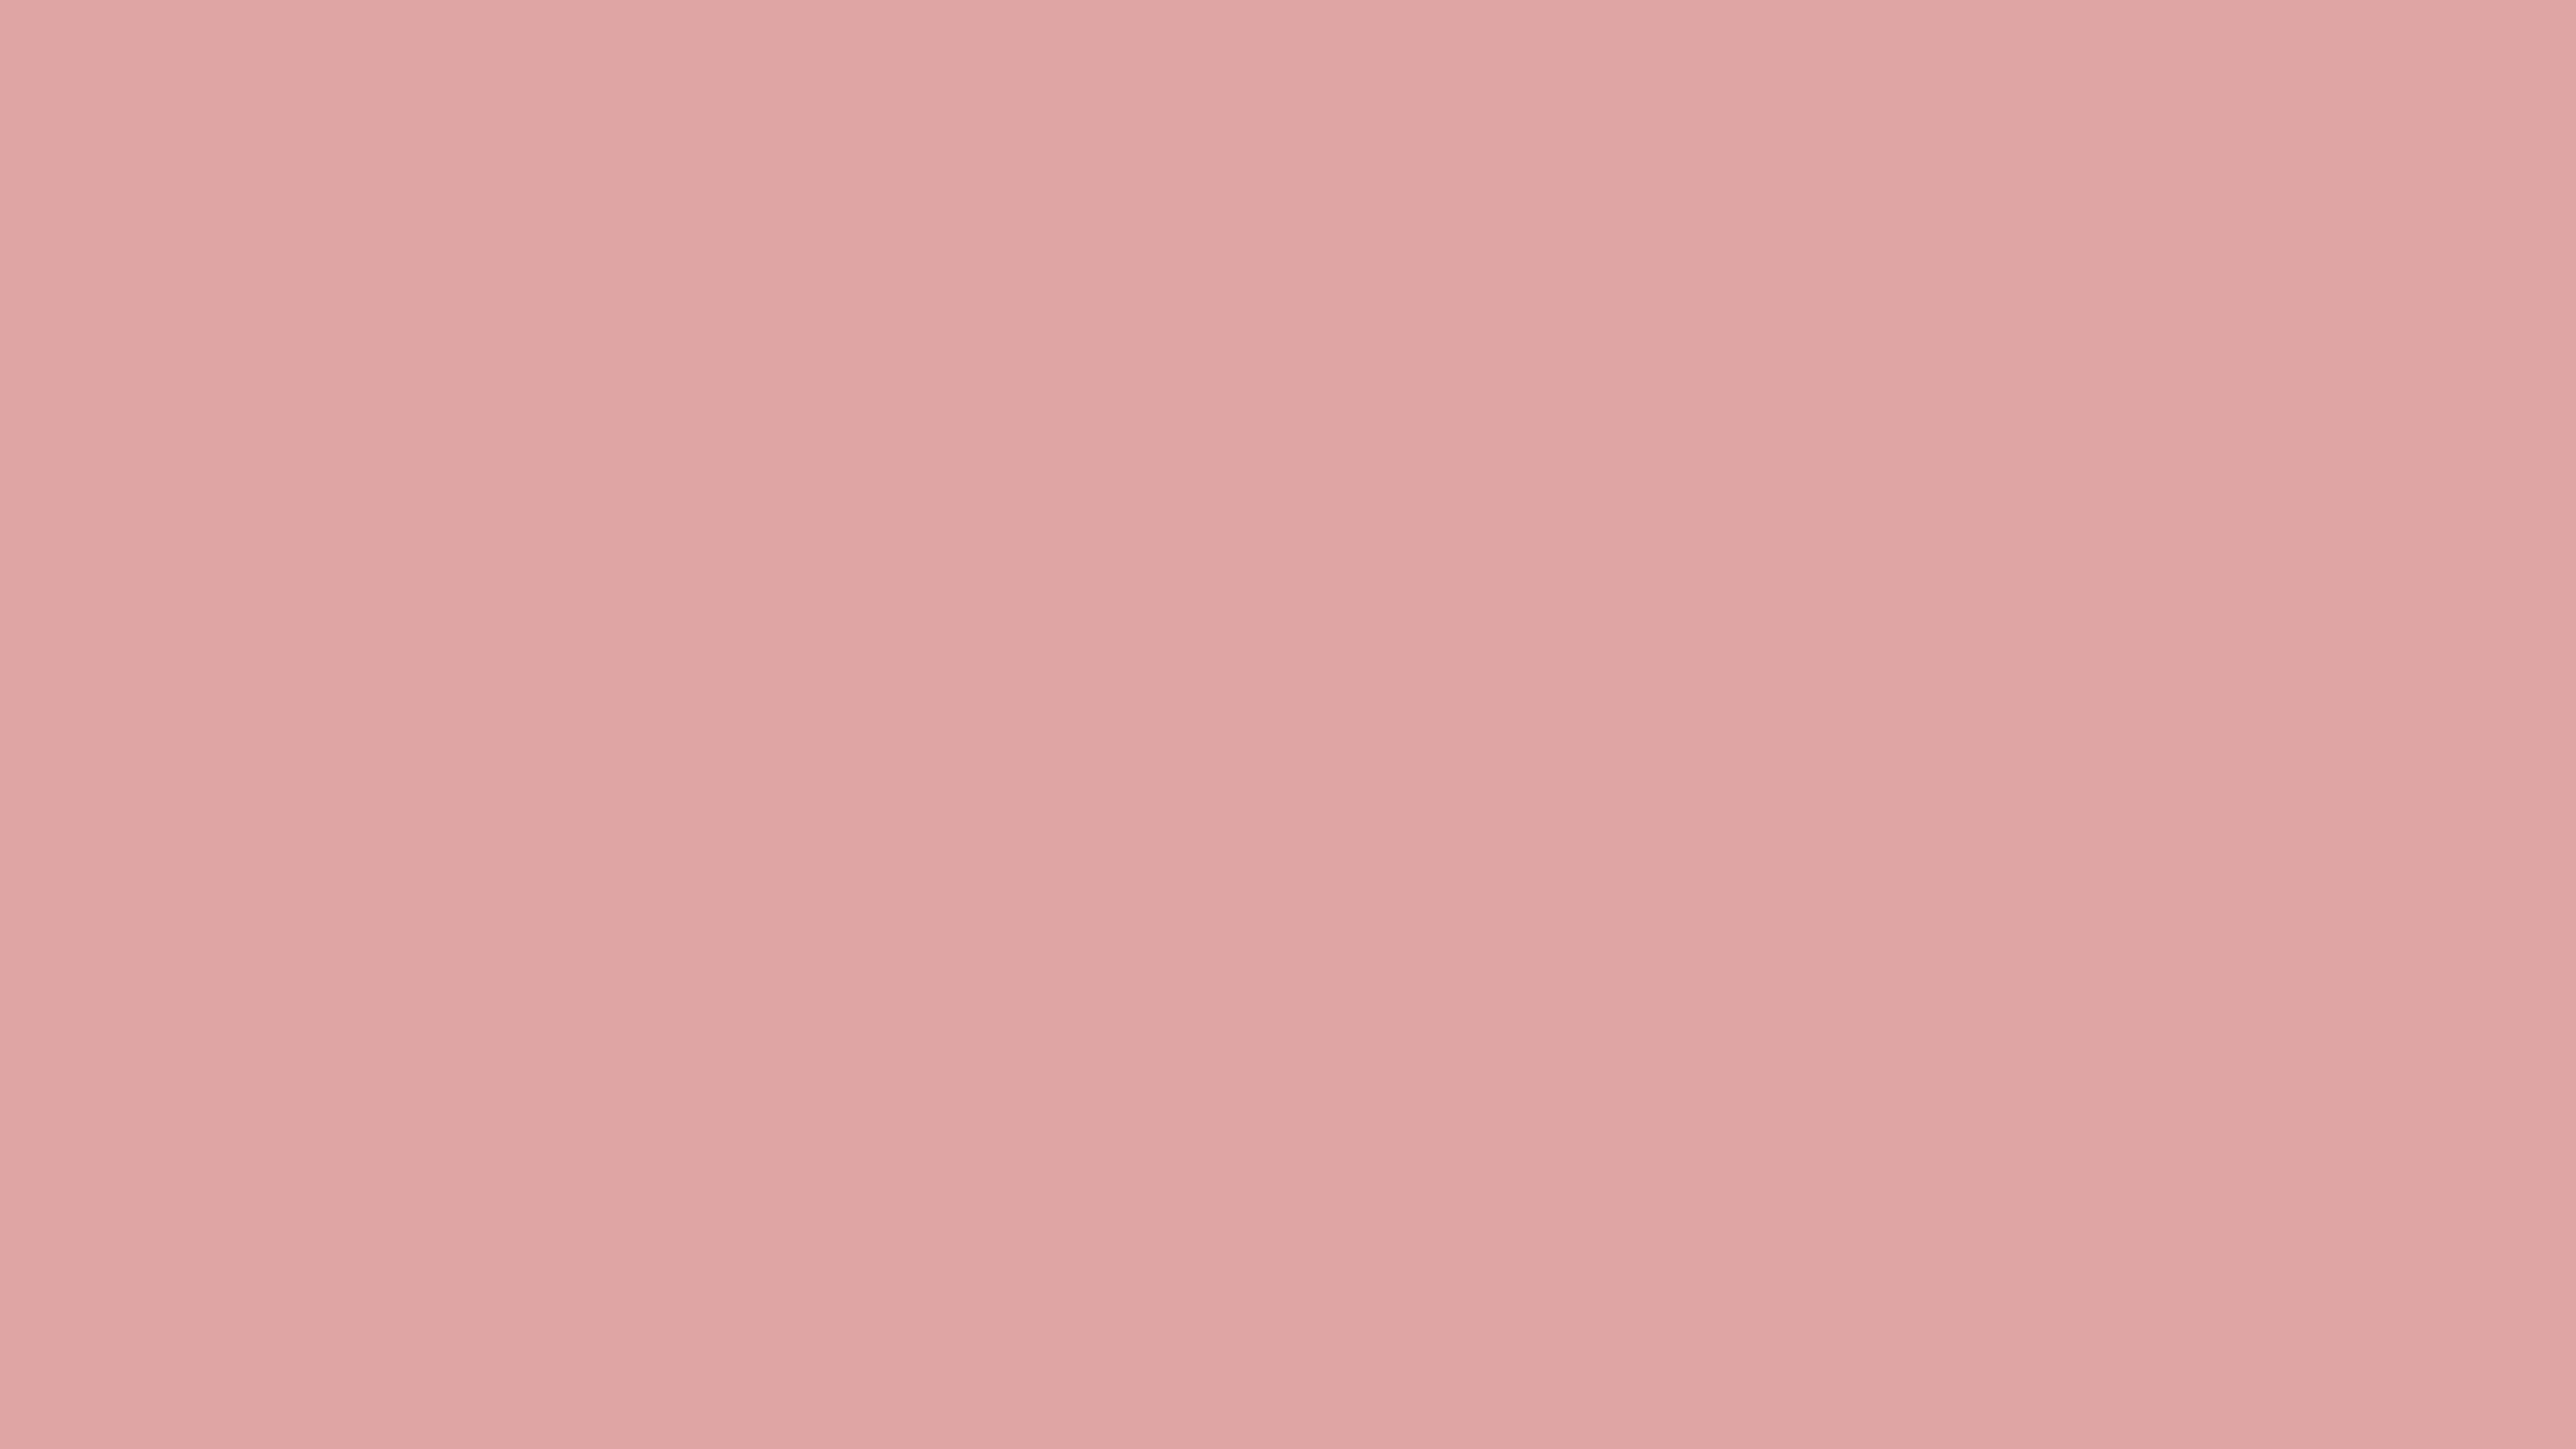 3840x2160 Pastel Pink Solid Color Background